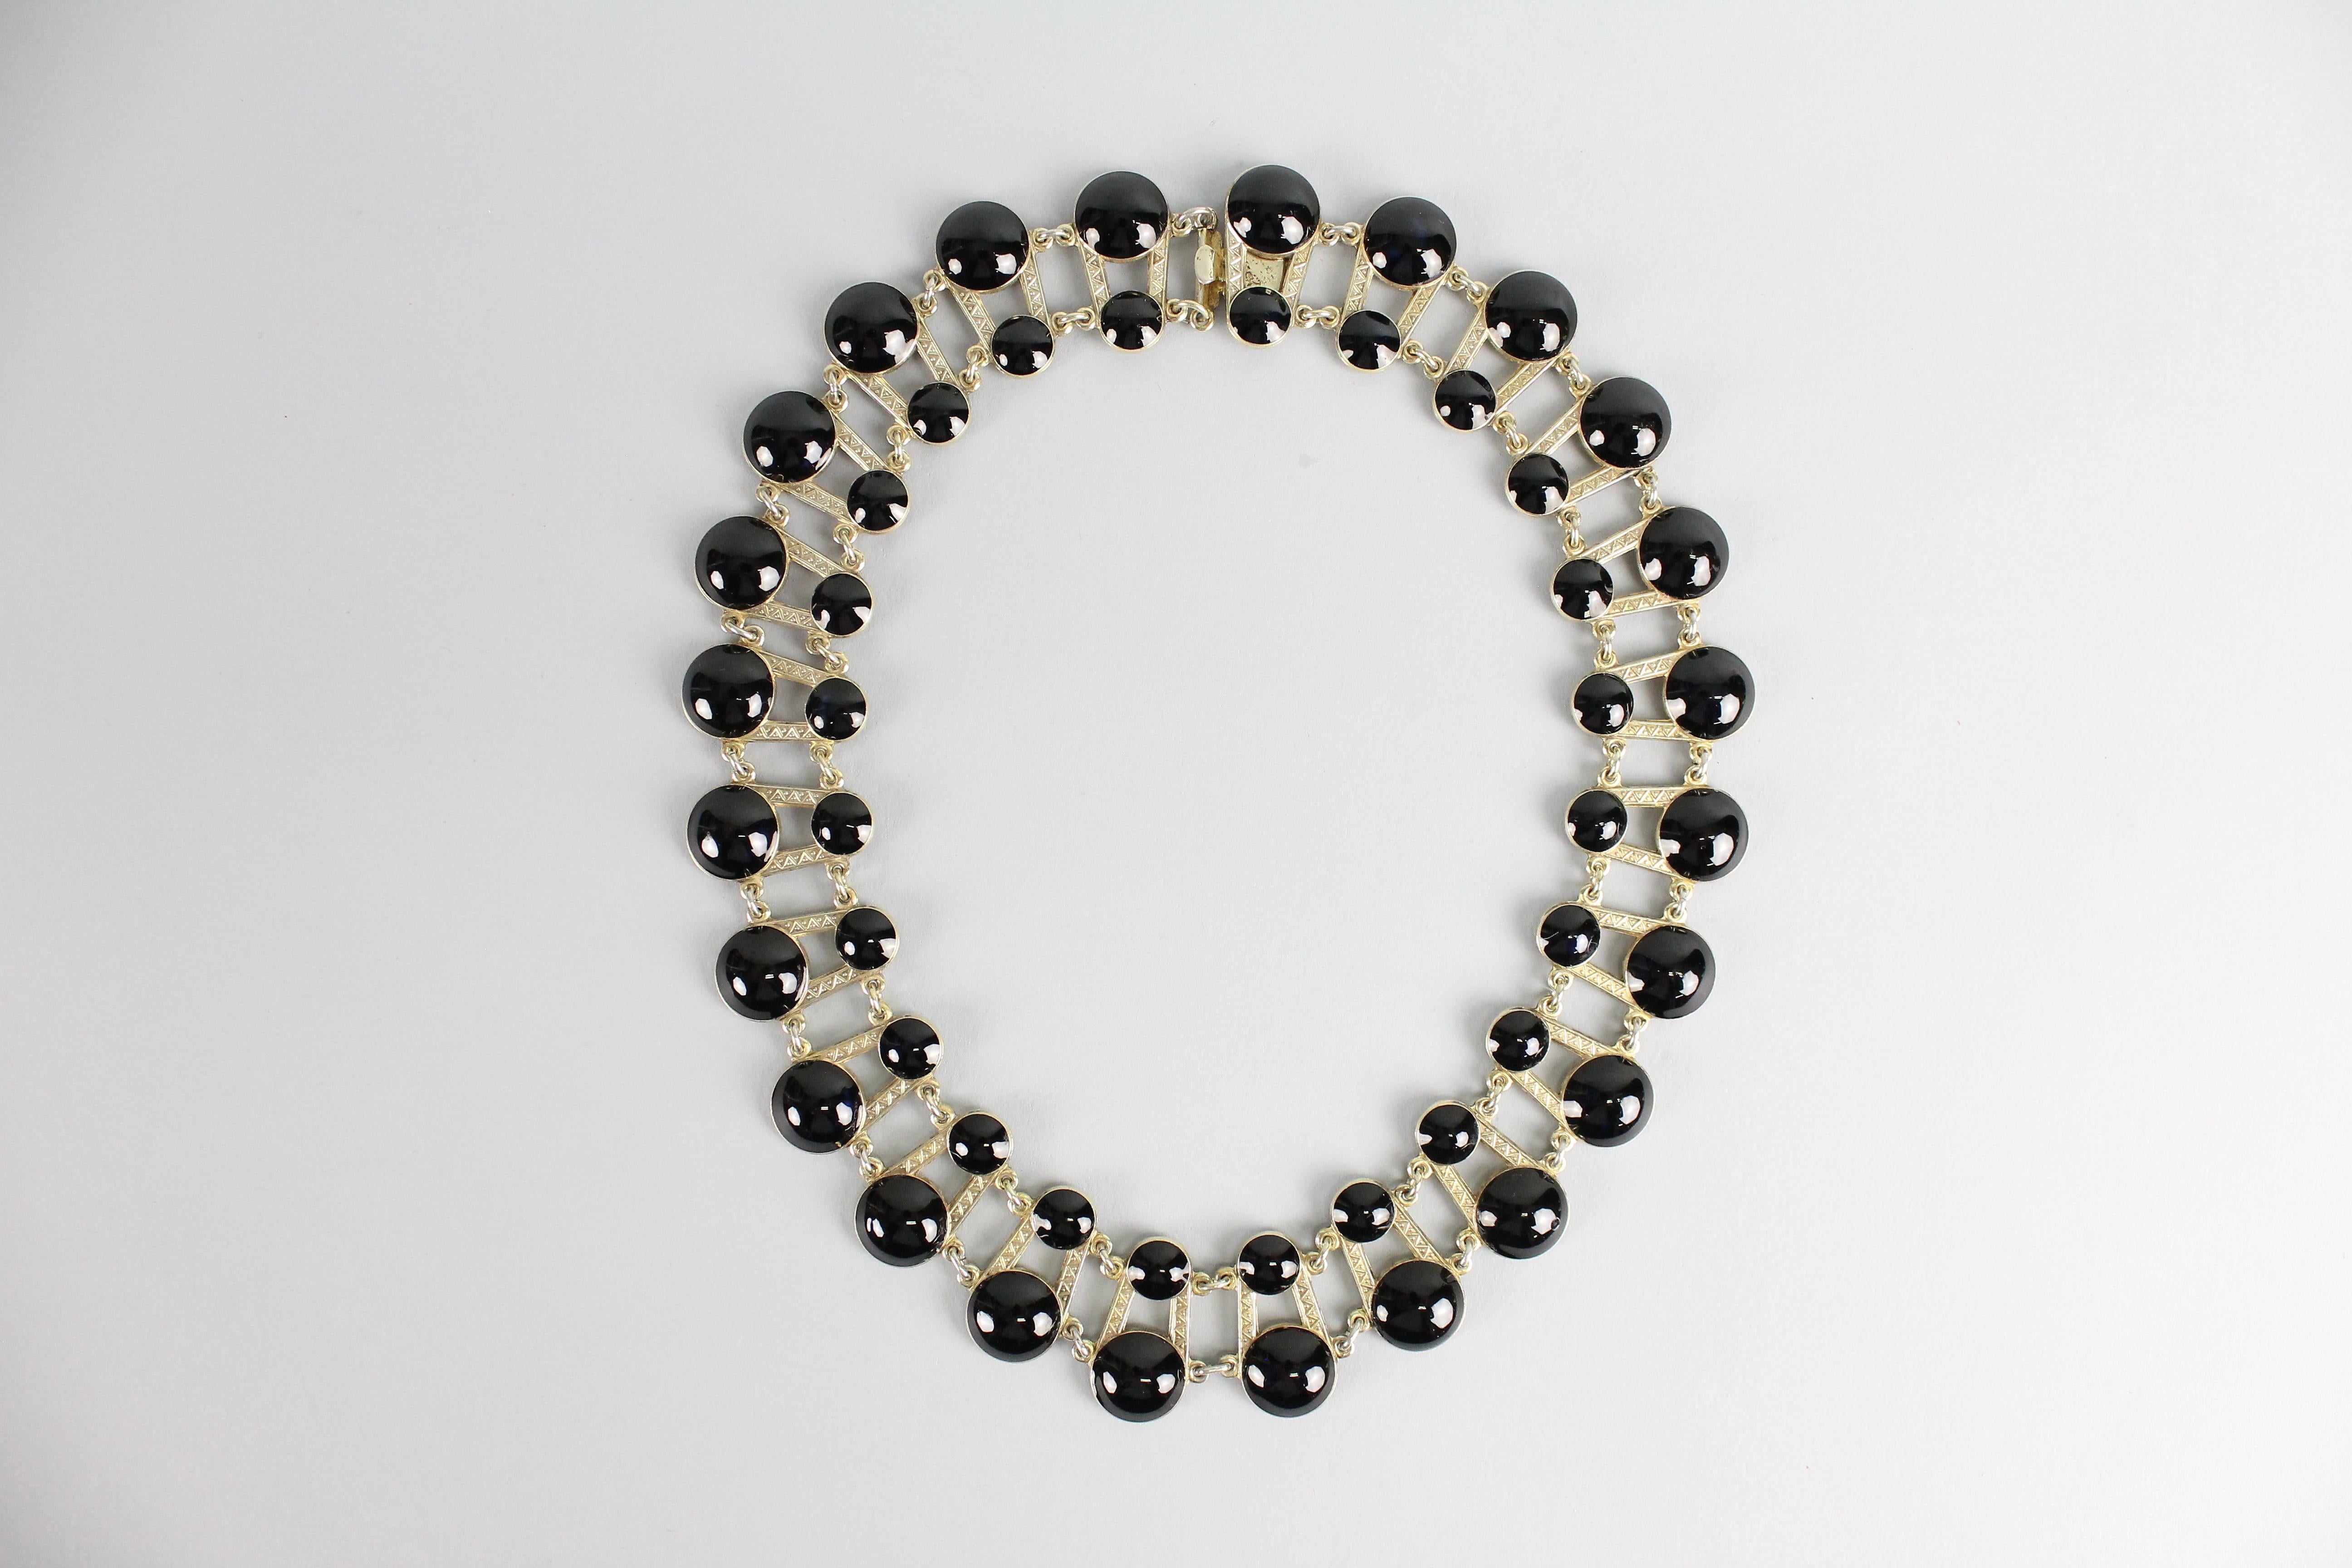 Very nice necklace by Aksel Holmsen, Norway.
Made in gilt sterling silver and black enamel.
Great condition, no issues!